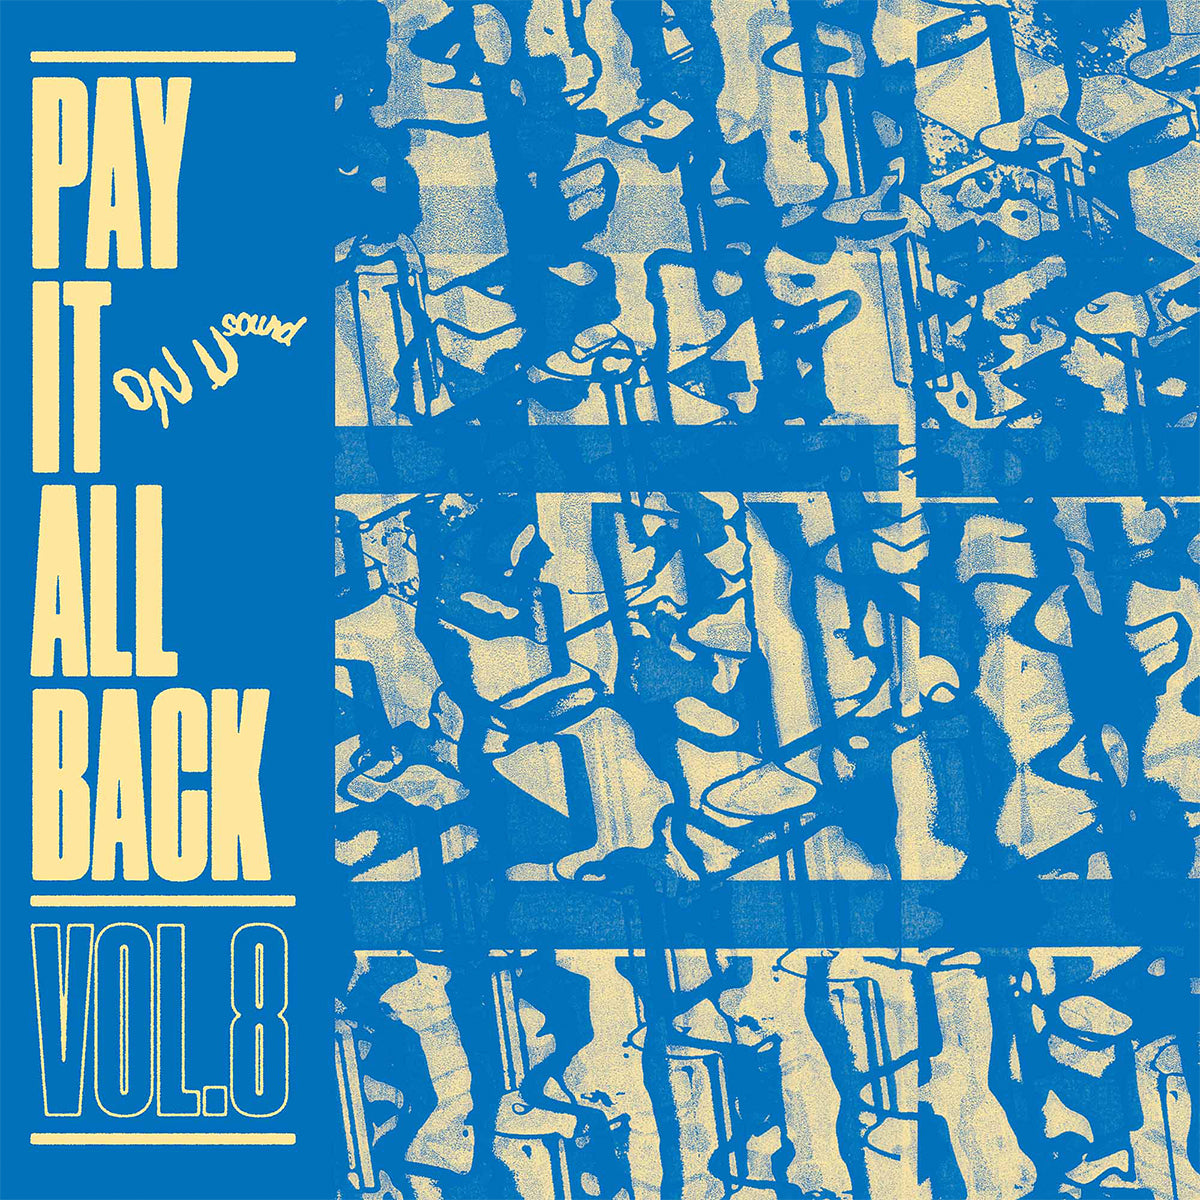 VARIOUS - Pay It All Back Vol 8 - CD